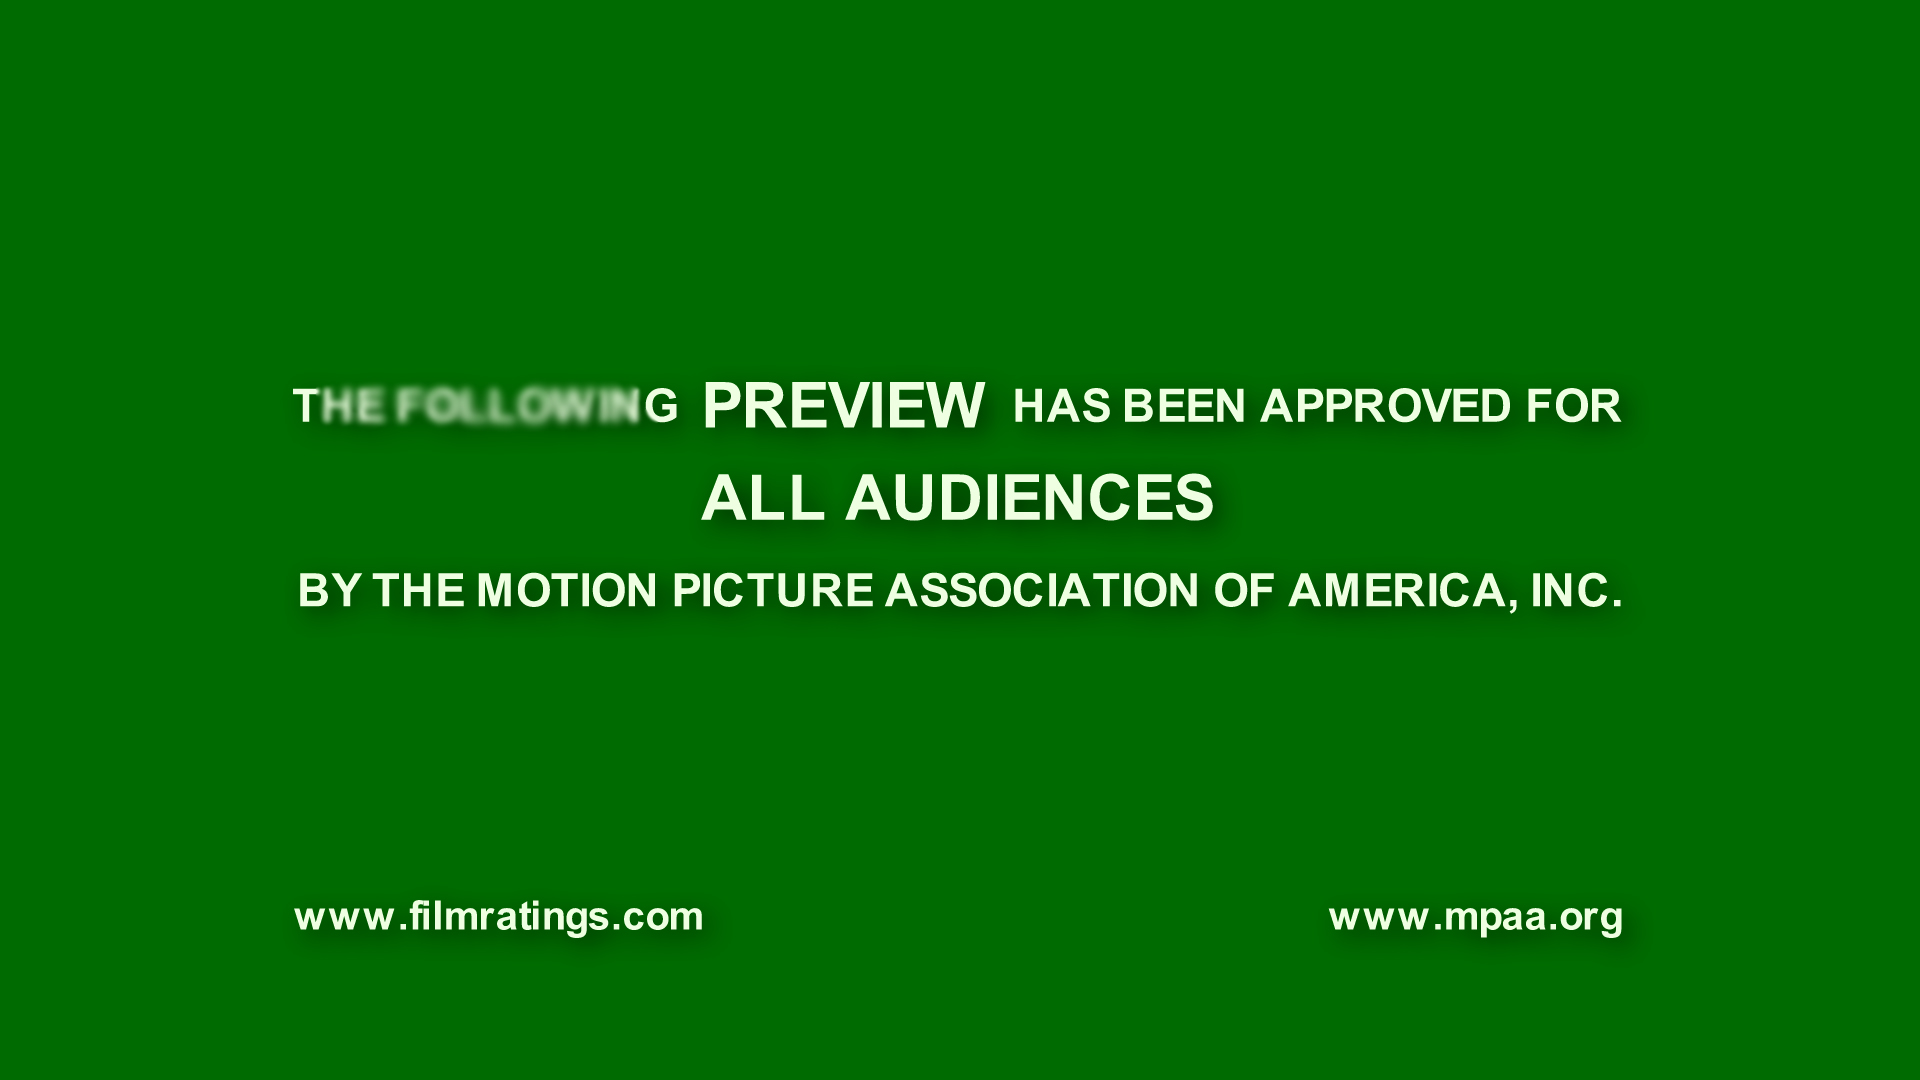 Appropriate audiences. The following Preview has been approved for all audiences.